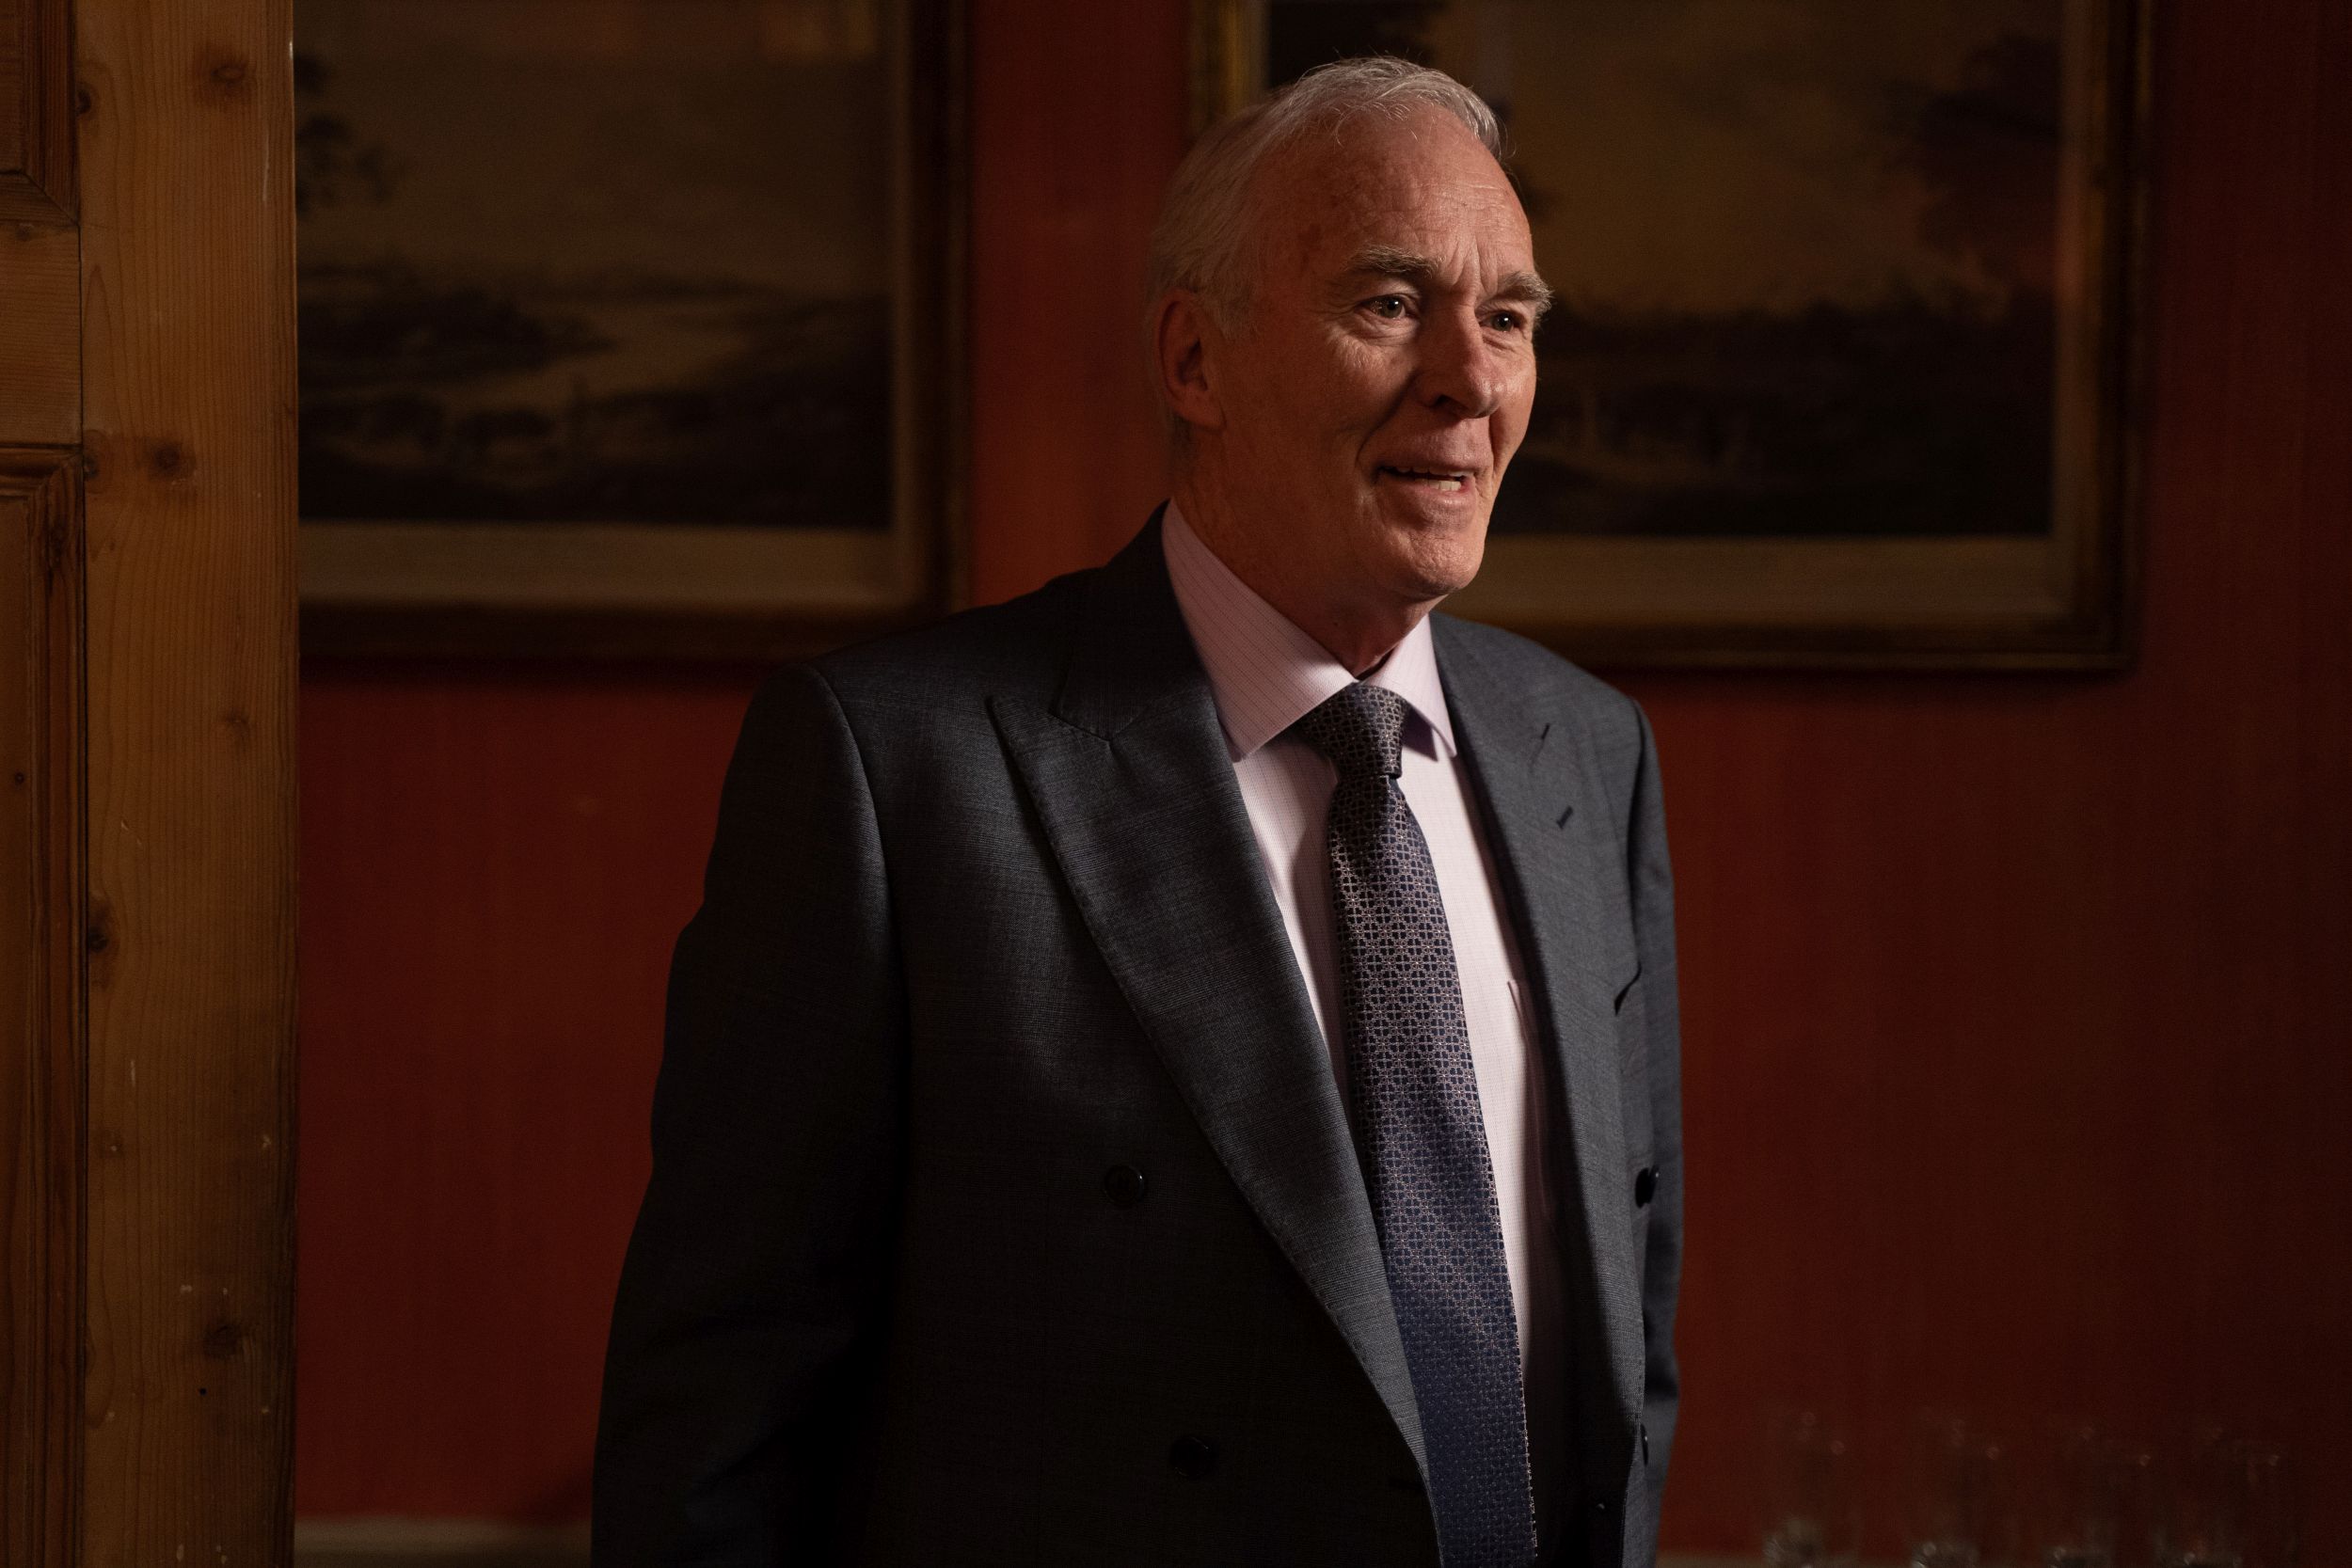 Ian McElhinney as Lord Tony Hume reacts to an ill timed surprise party in 'Unforgotten' Season 5